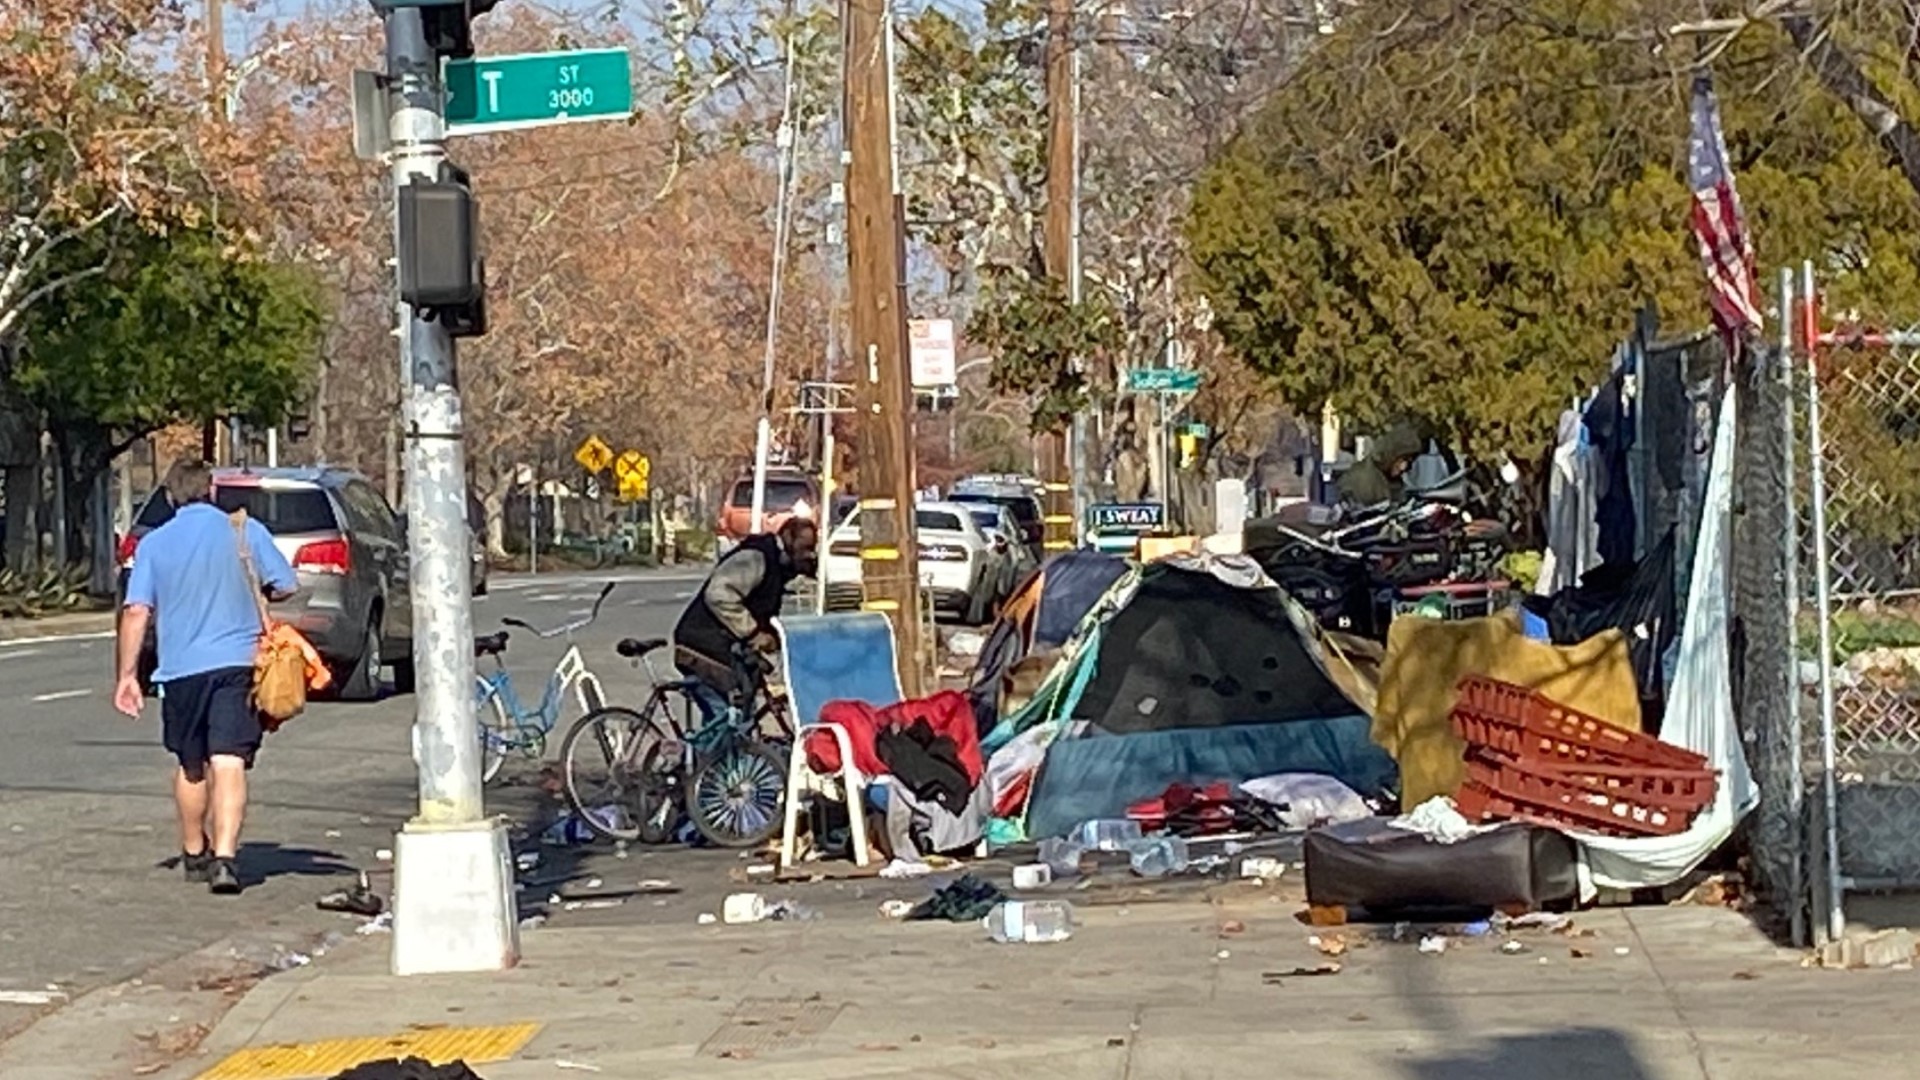 In Sacramento County one person experiencing homelessness dies every two days in mid year 2022, according to the report.